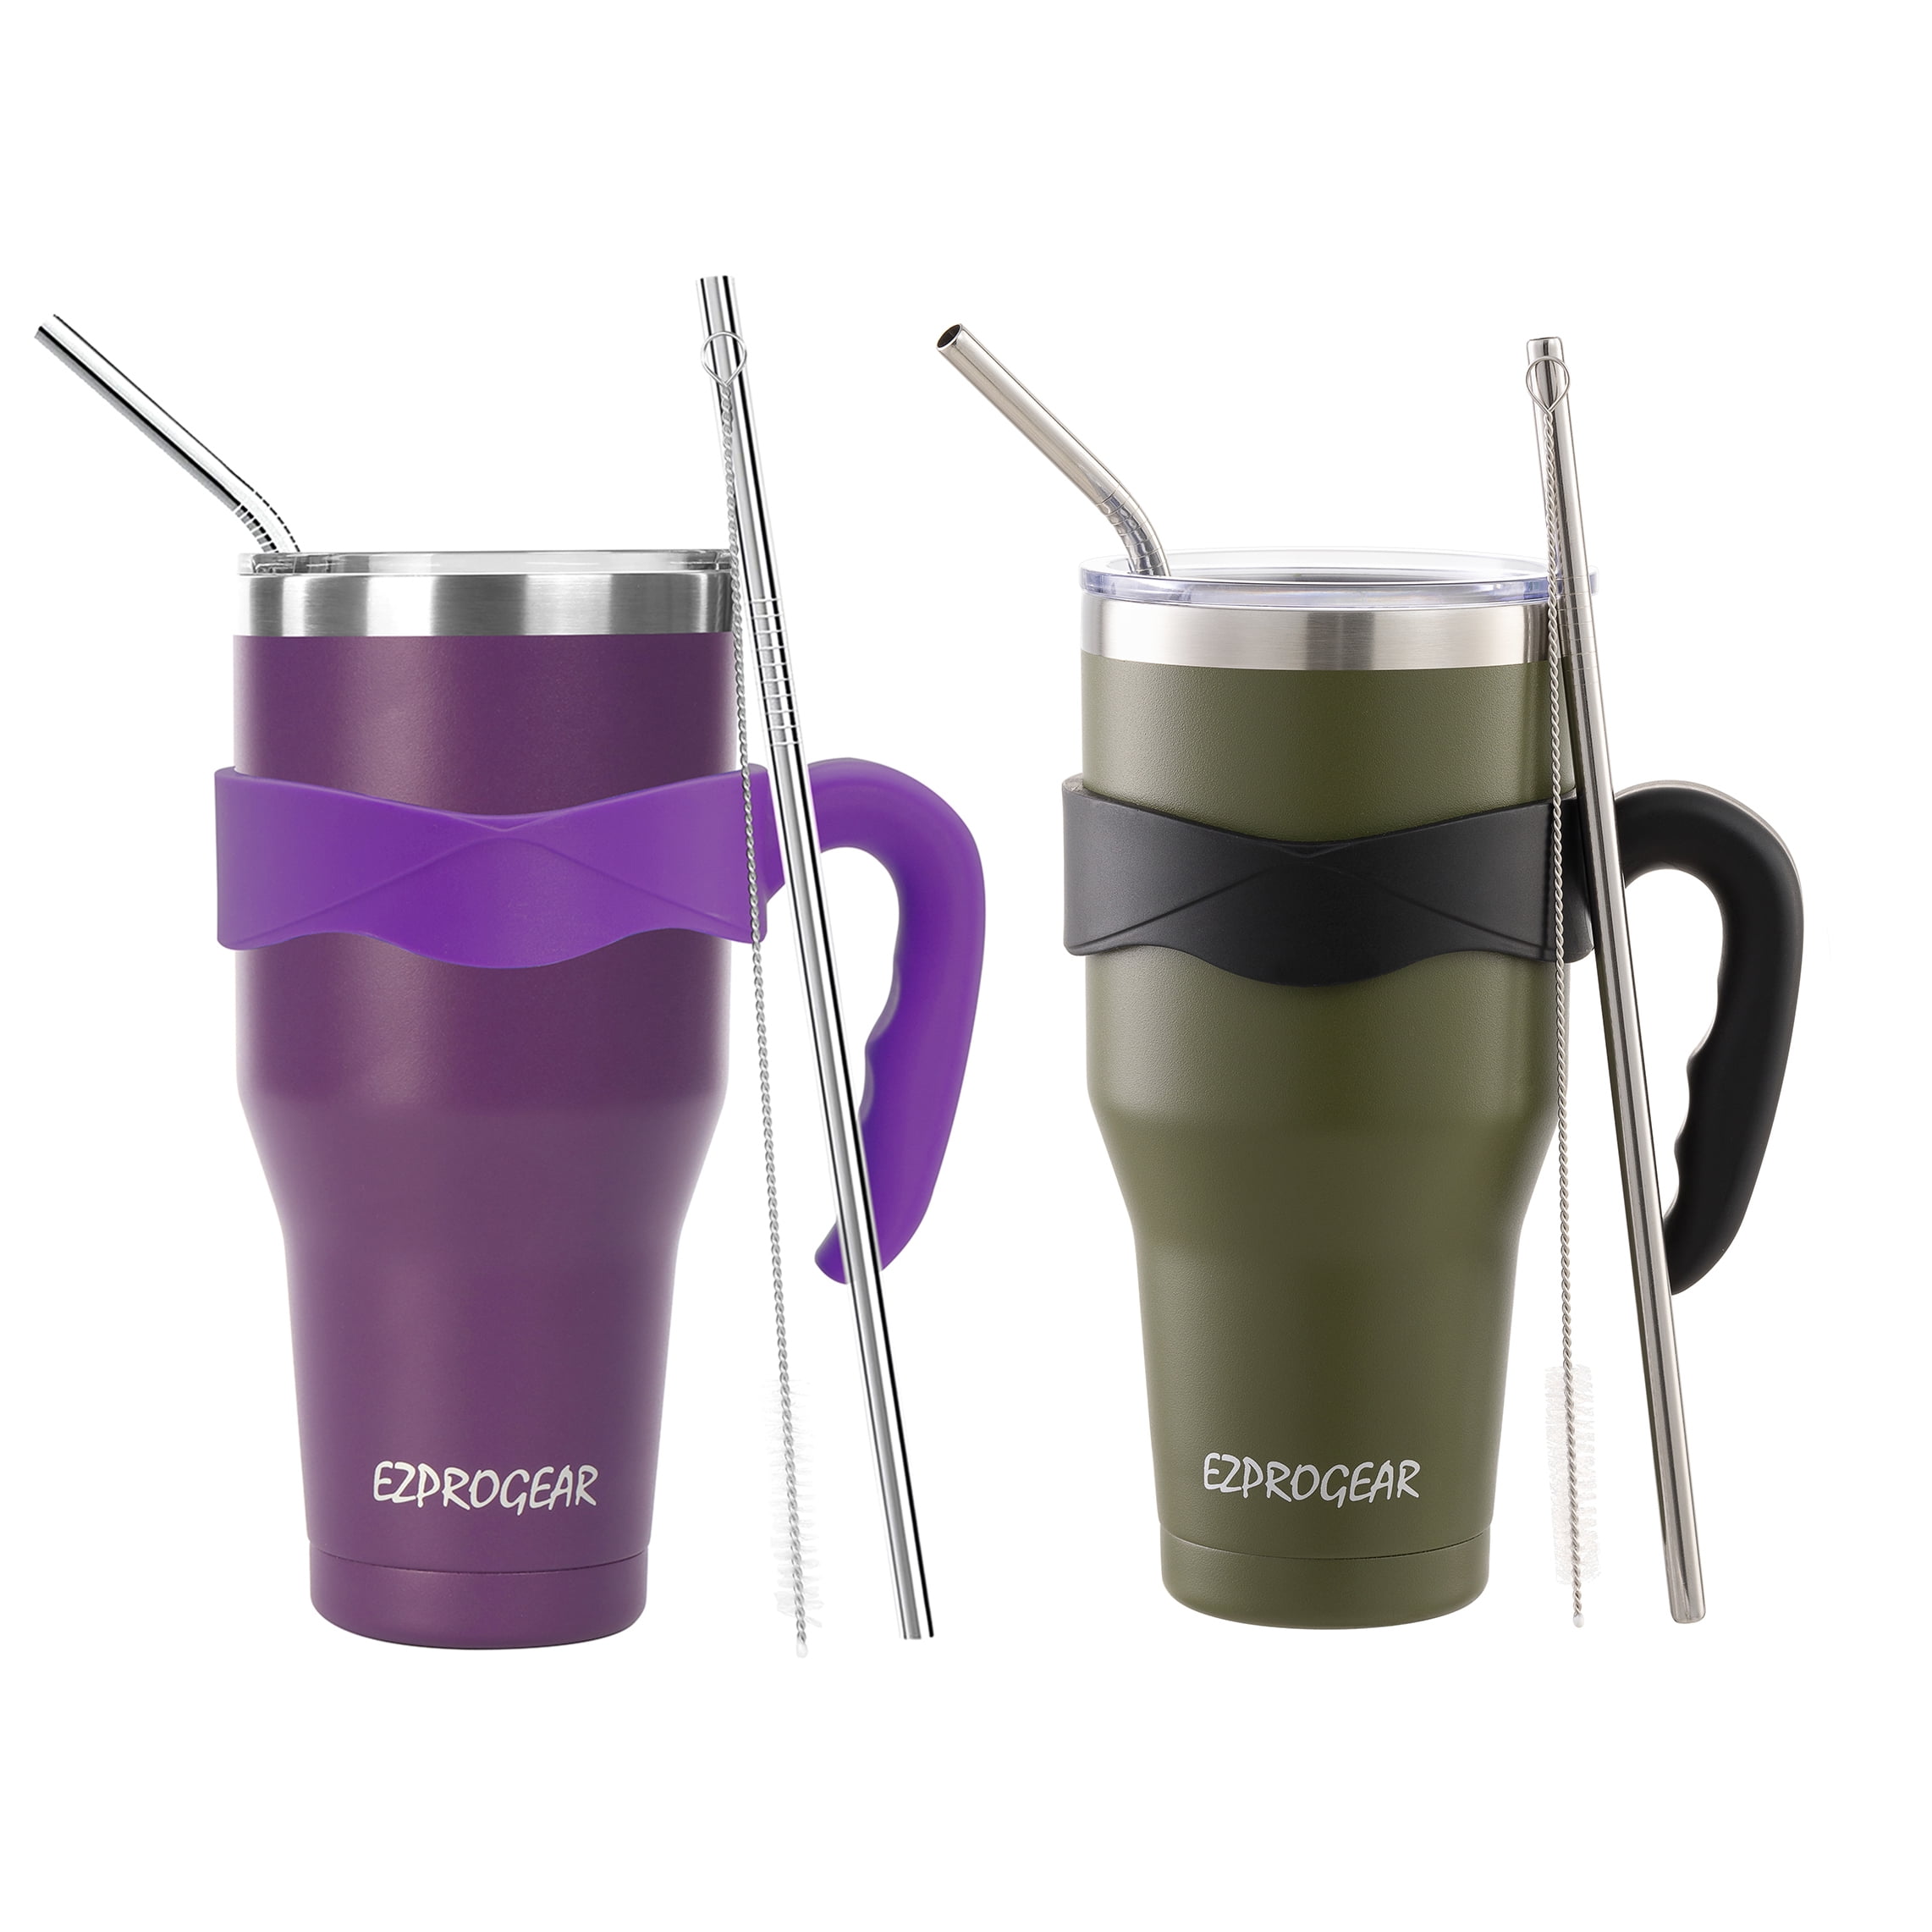 Straws　Wall　Travel　Olive　Handle　and　Cup　oz　Insulated　Coffee　Mug　Vacuum　Pack　Double　Tumbler　40　Steel　with　Ezprogear　Green)　Stainless　(Purple